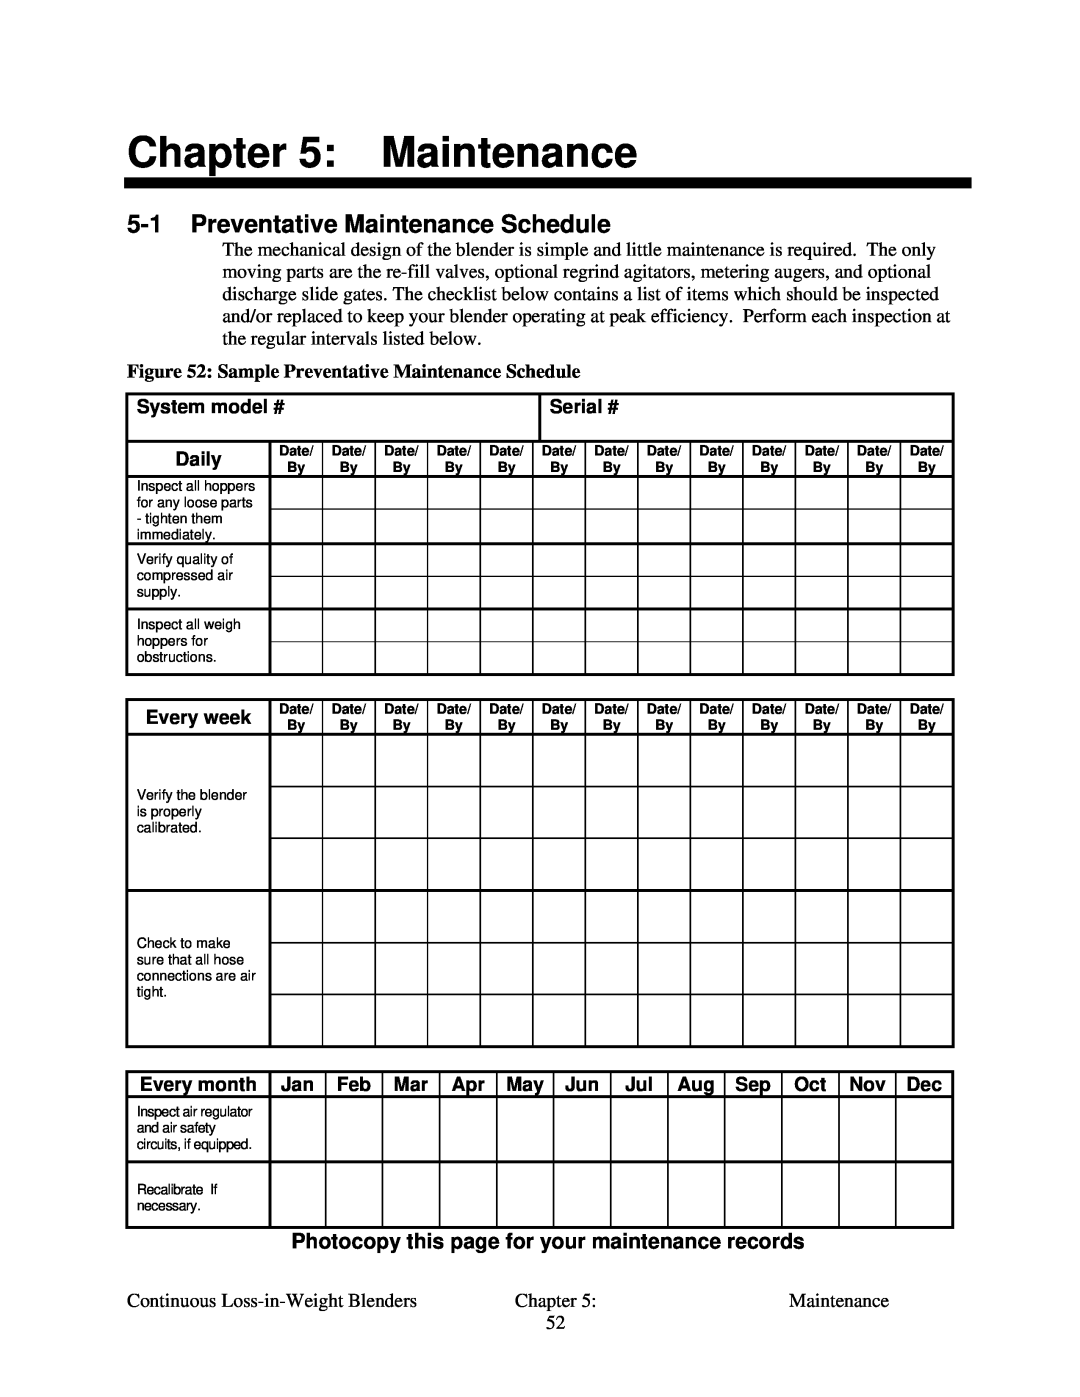 Sterling 015 5-1Preventative Maintenance Schedule, Photocopy this page for your maintenance records, System model # 